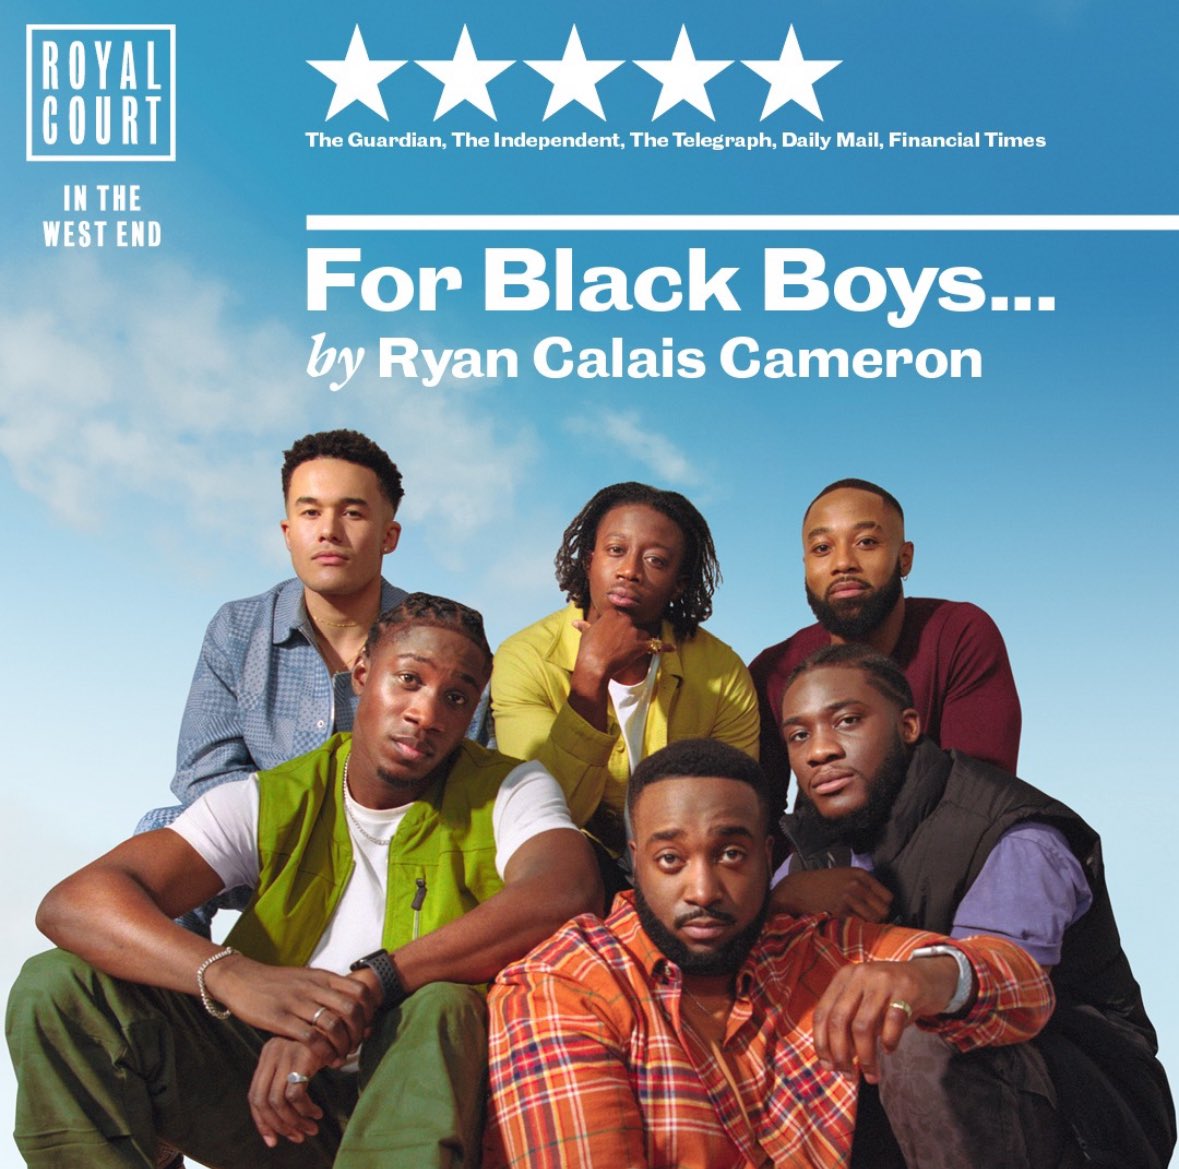 Five tickets available for the 9th May 2.30pm show… hit me up if interested and yes they’re free!!! #ForBlackBoys